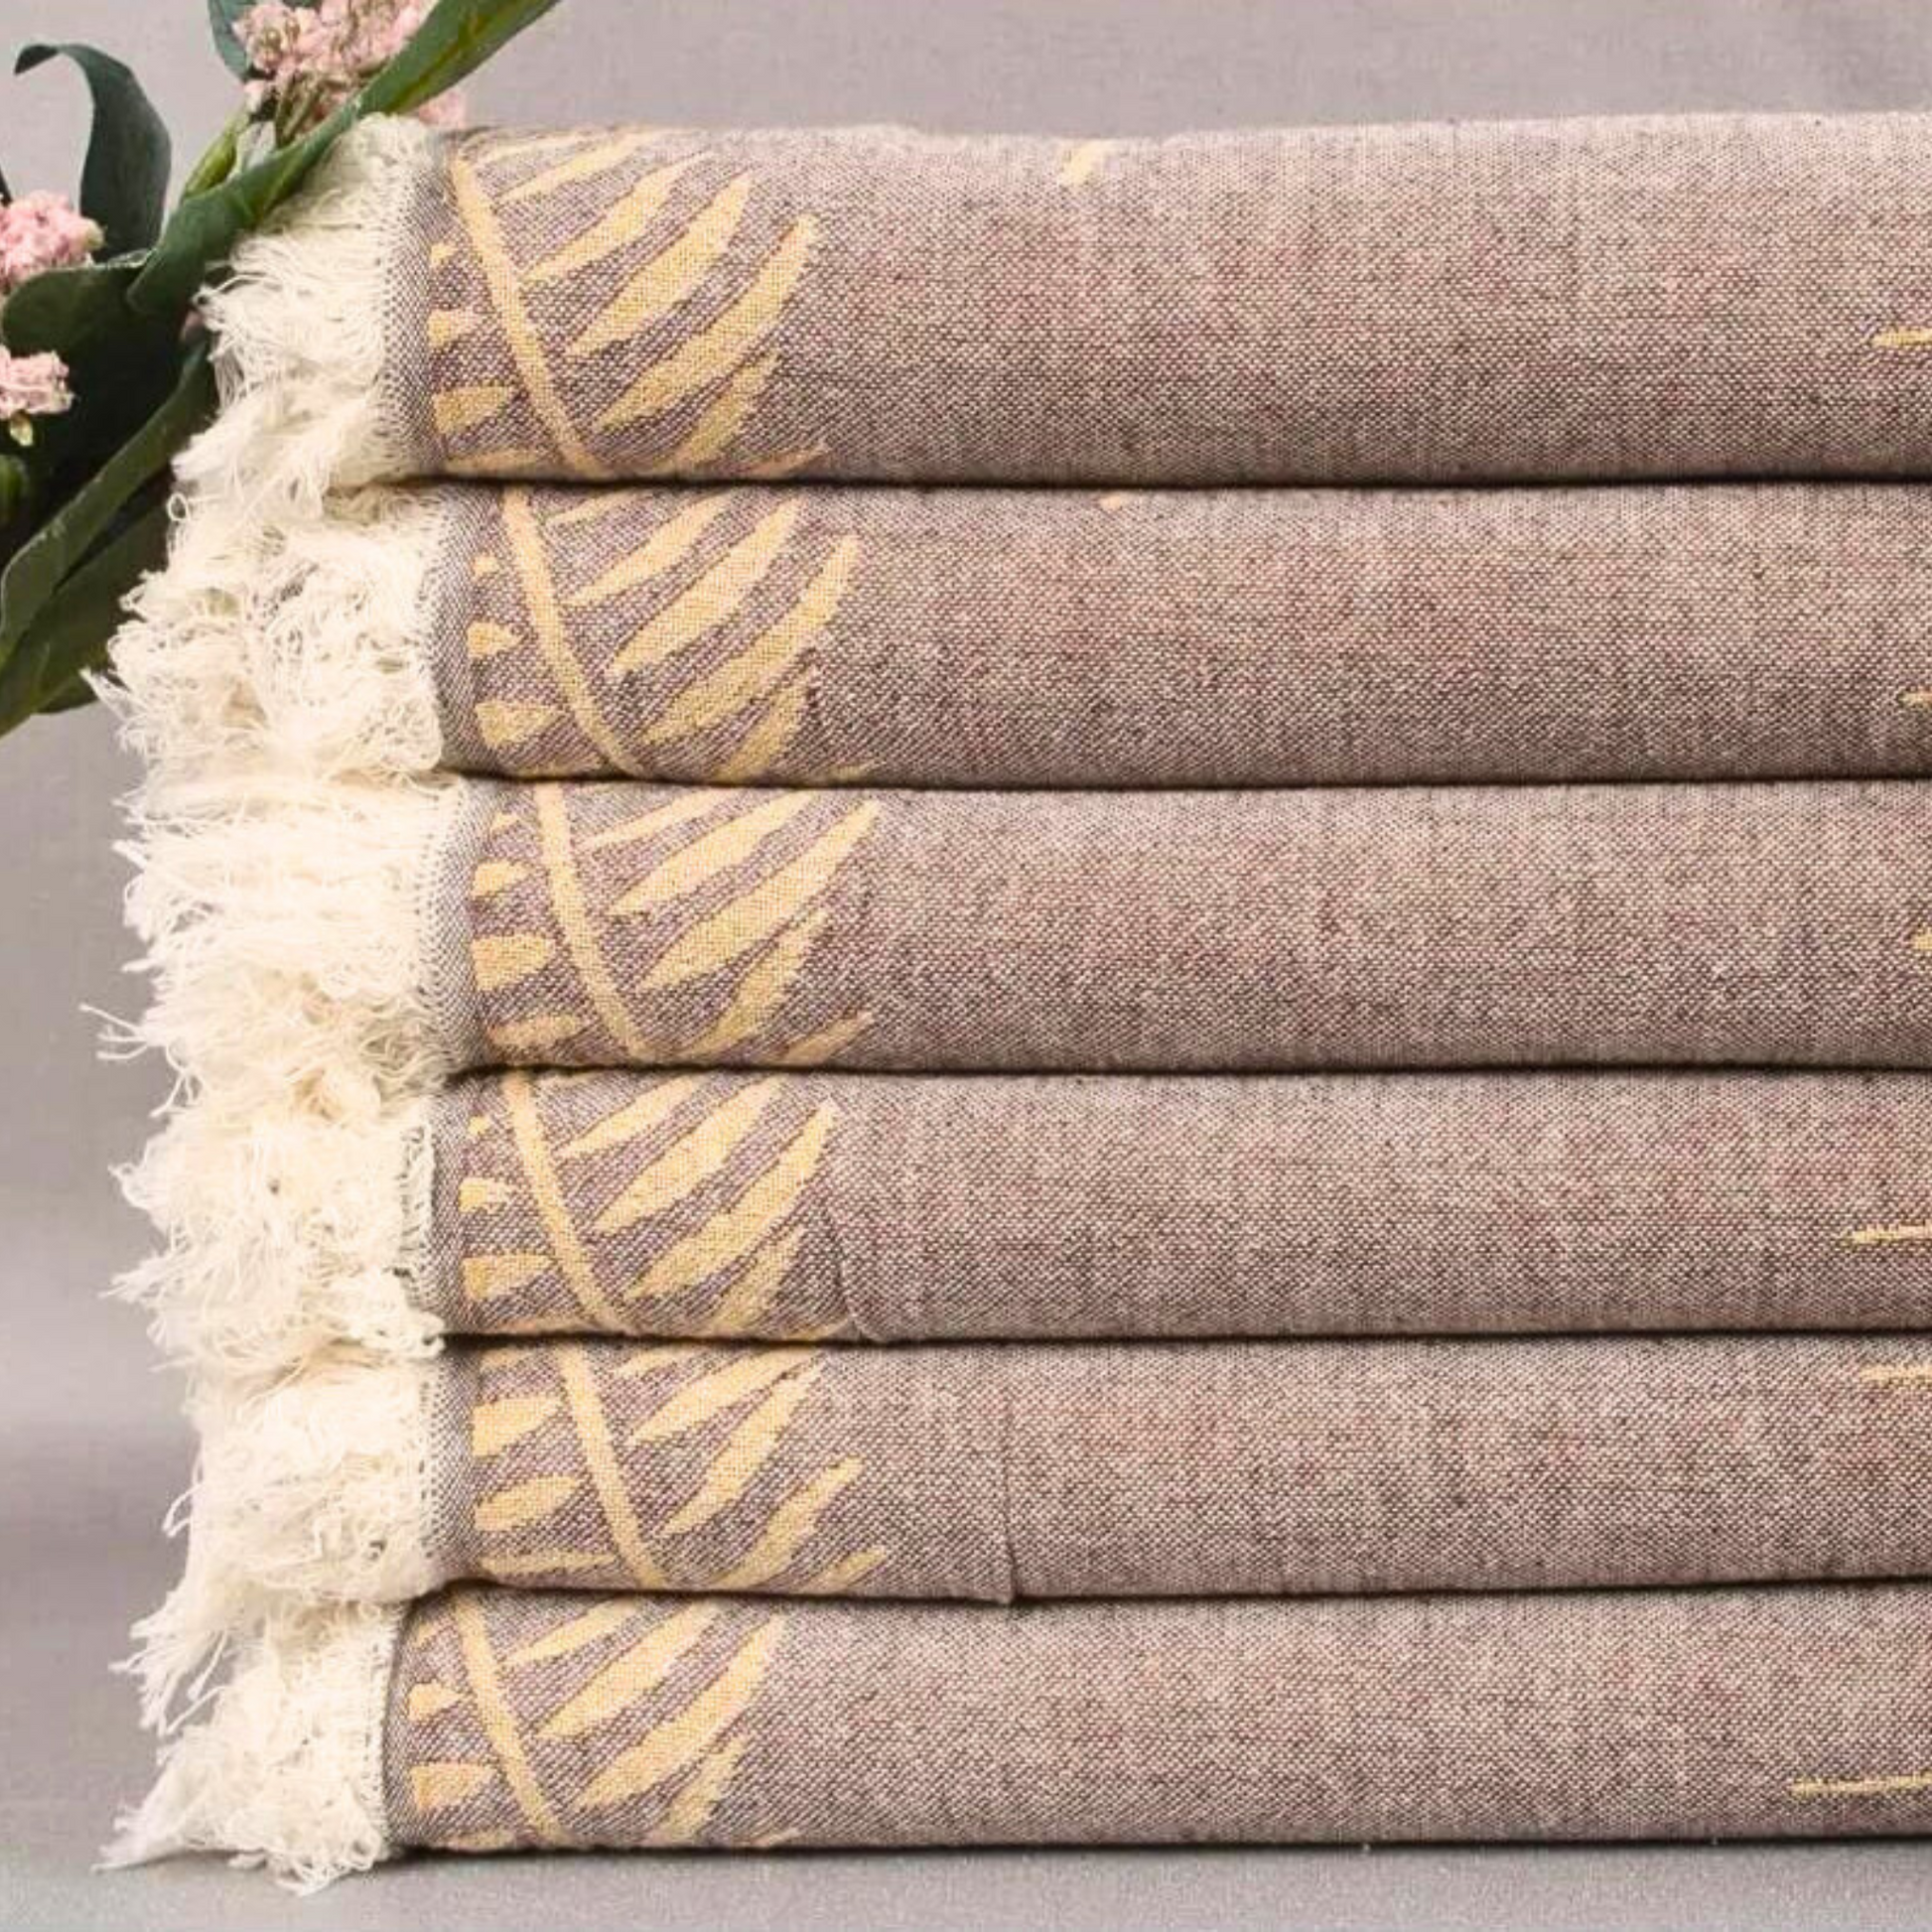 Stacked brown FERN Turkish Towels with yellow leaf patterns, with a white fringed edge, set against a backdrop of soft pink flowers and a grey background